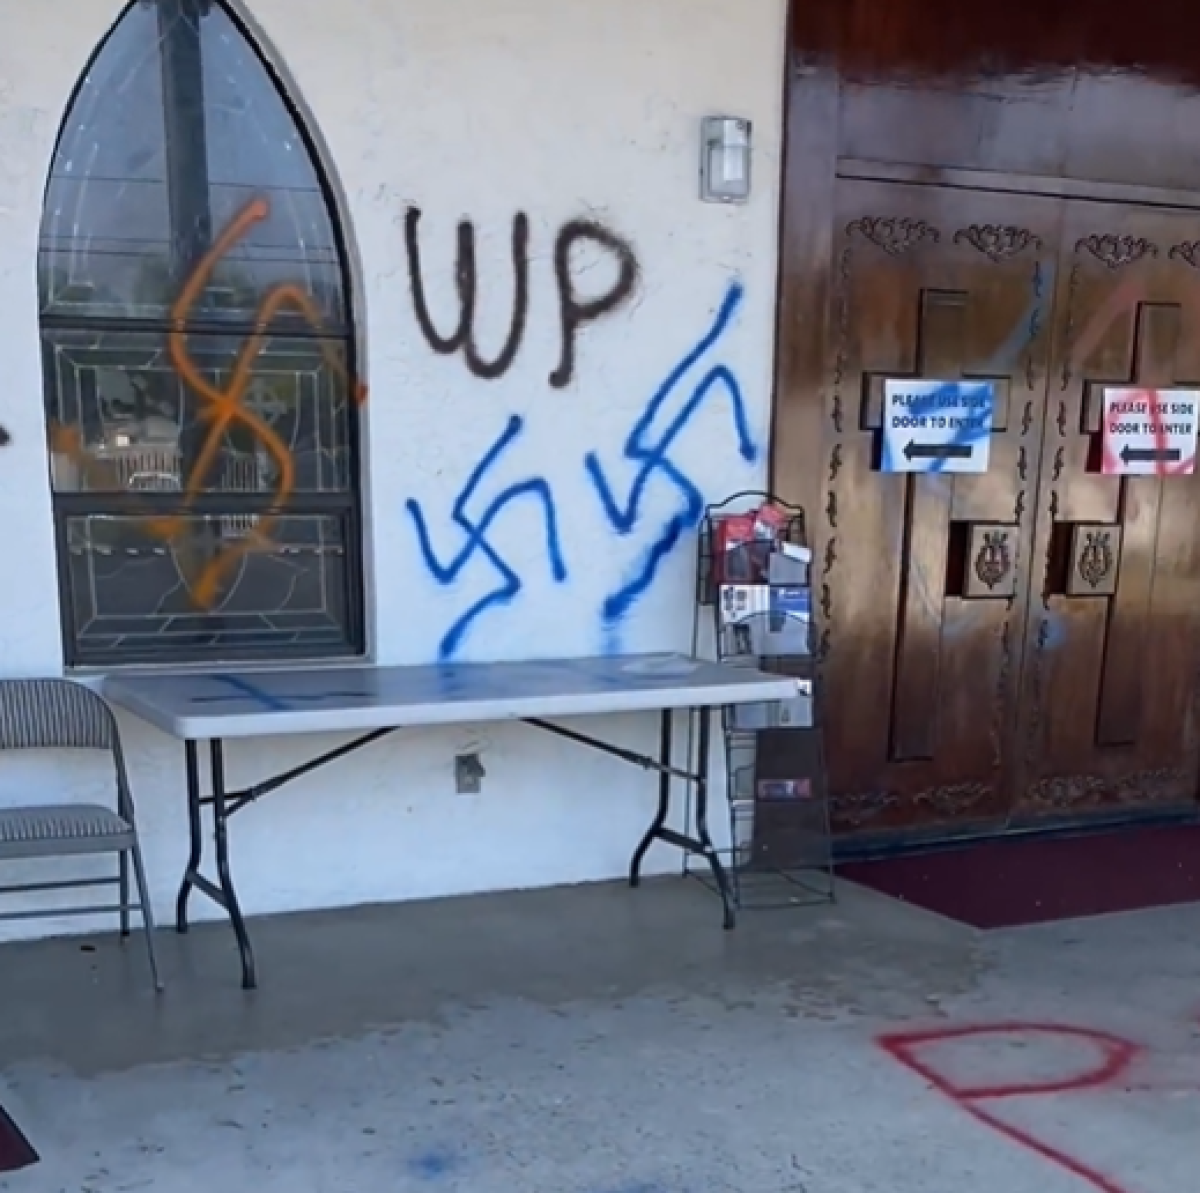 The Sheriff's Department is investigating graffiti on St. Peter Chaldean Catholic Diocese.